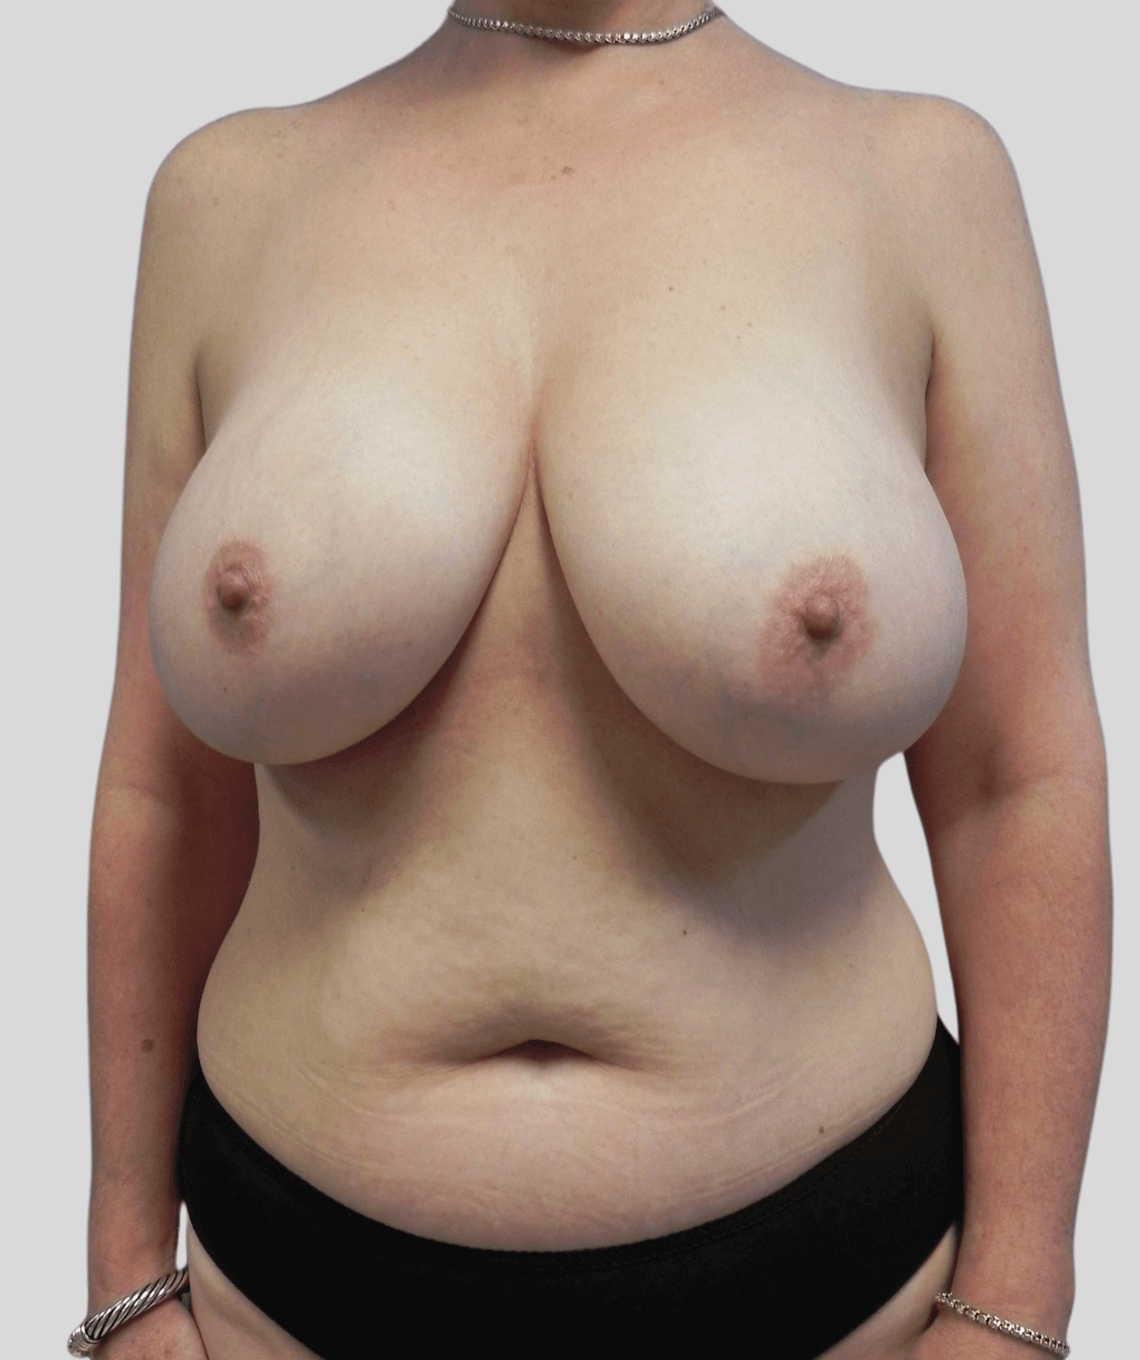 diep flap- before and after photos - before - prma plastic surgery - case 47